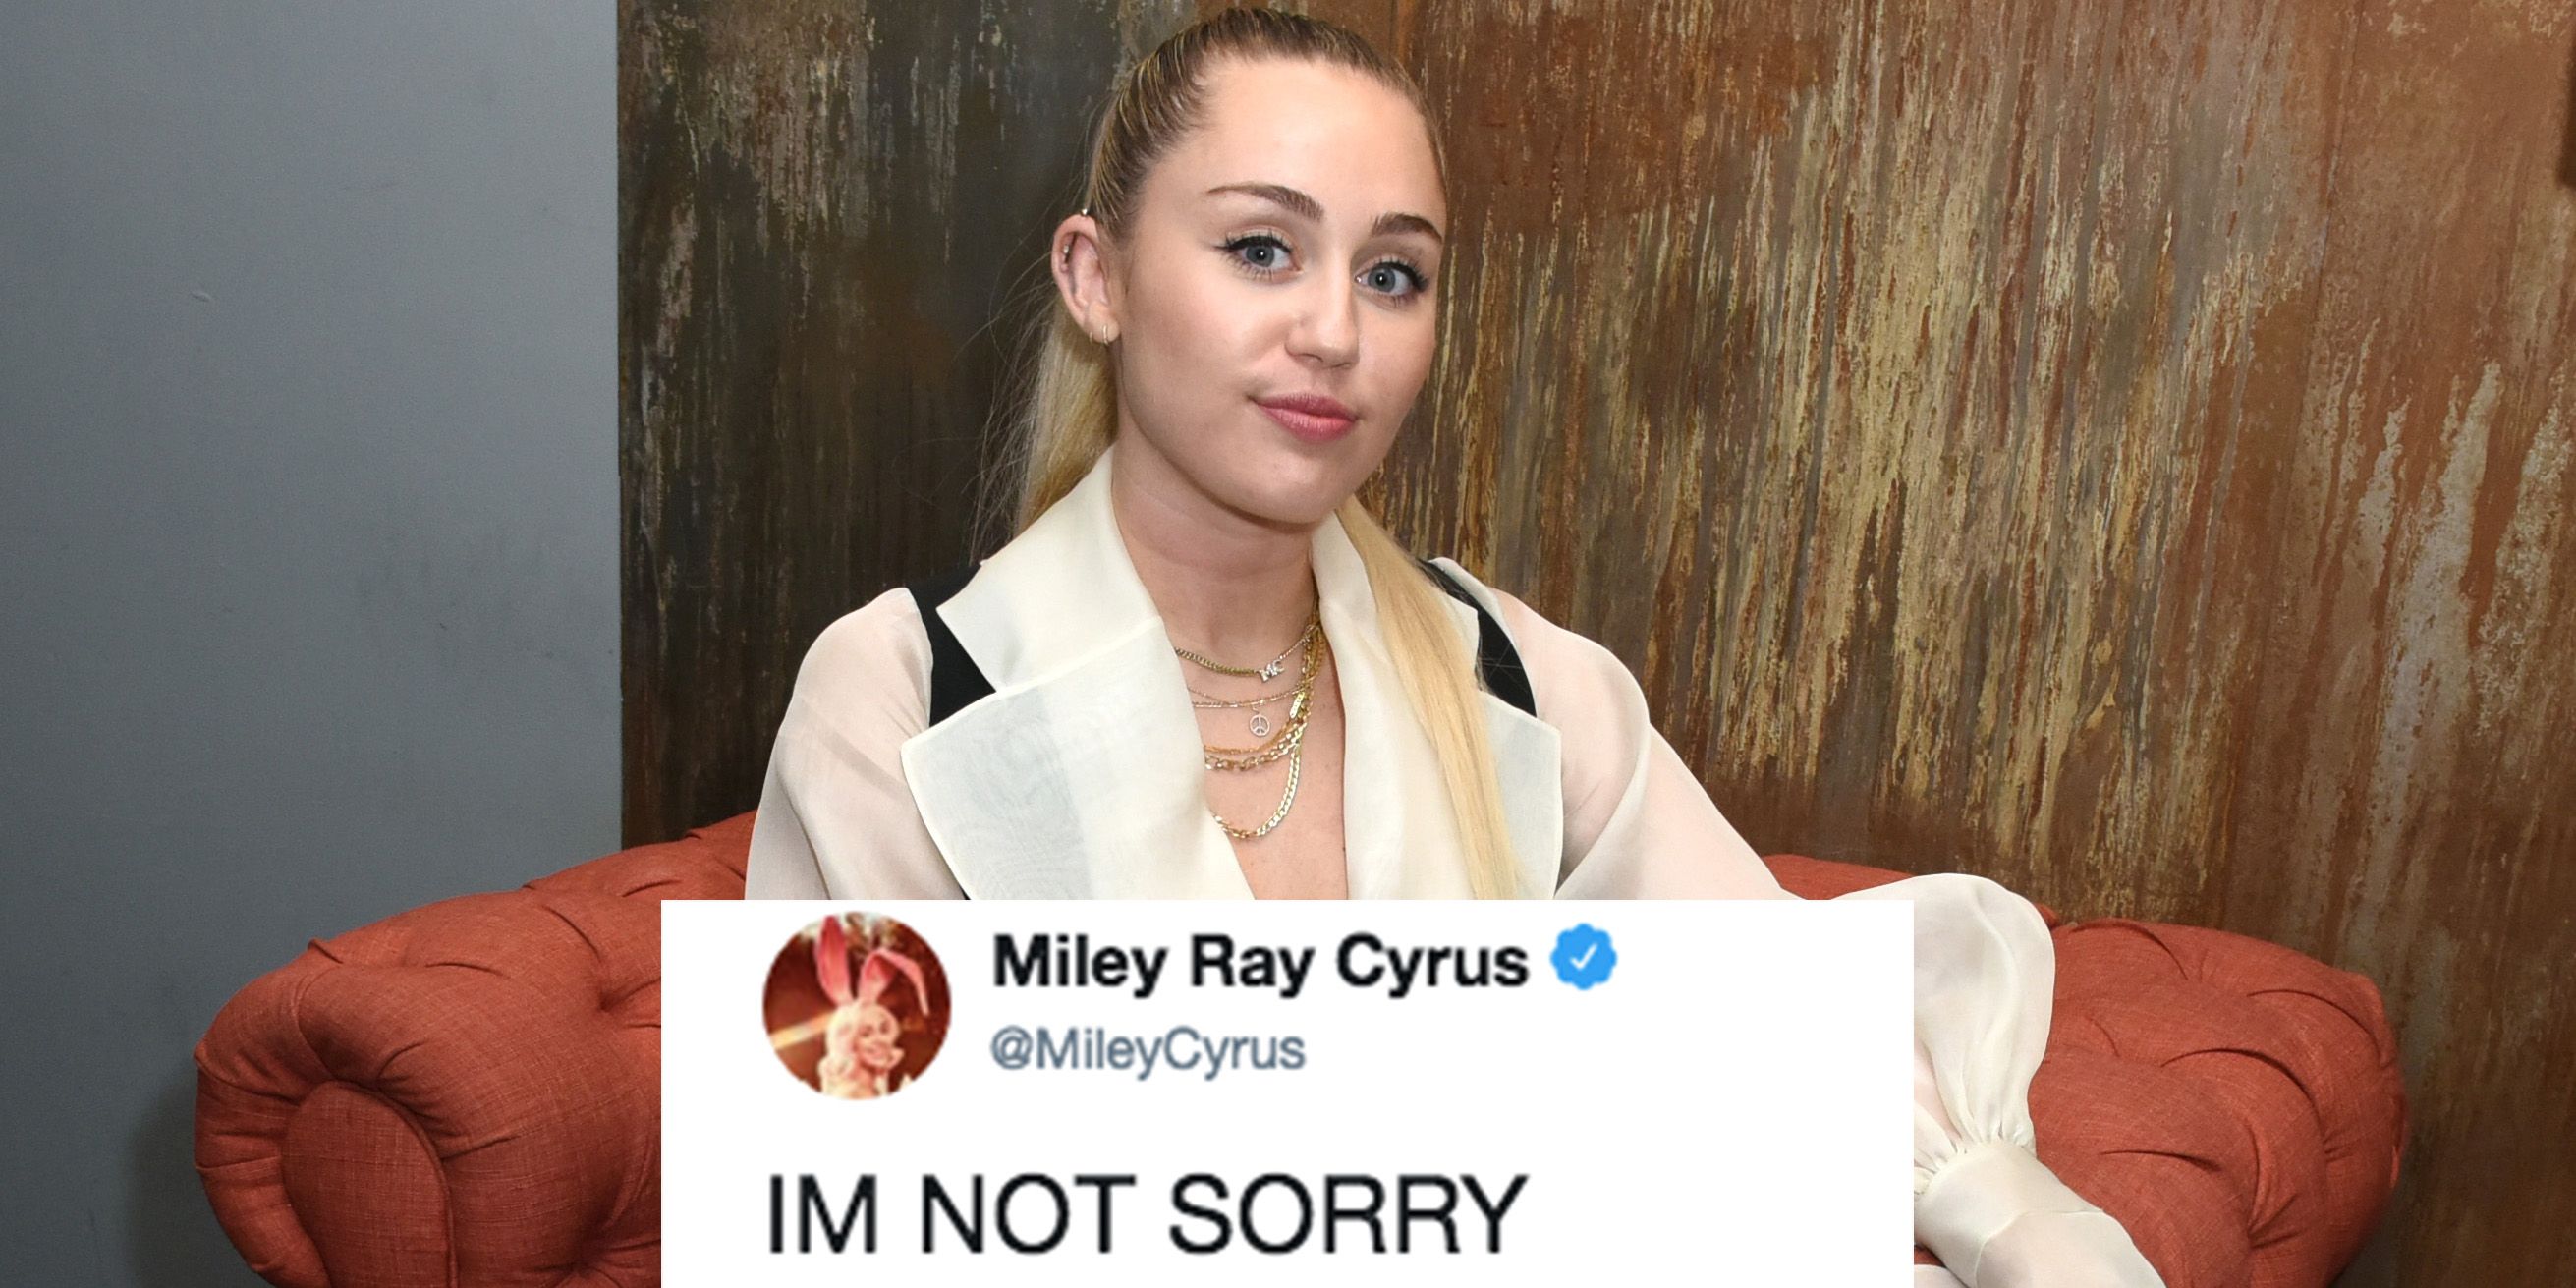 Real Celebrity Porn Miley Cyrus - Miley Cyrus Rescinds Apology for Posing Nearly Topless 10 Years Ago